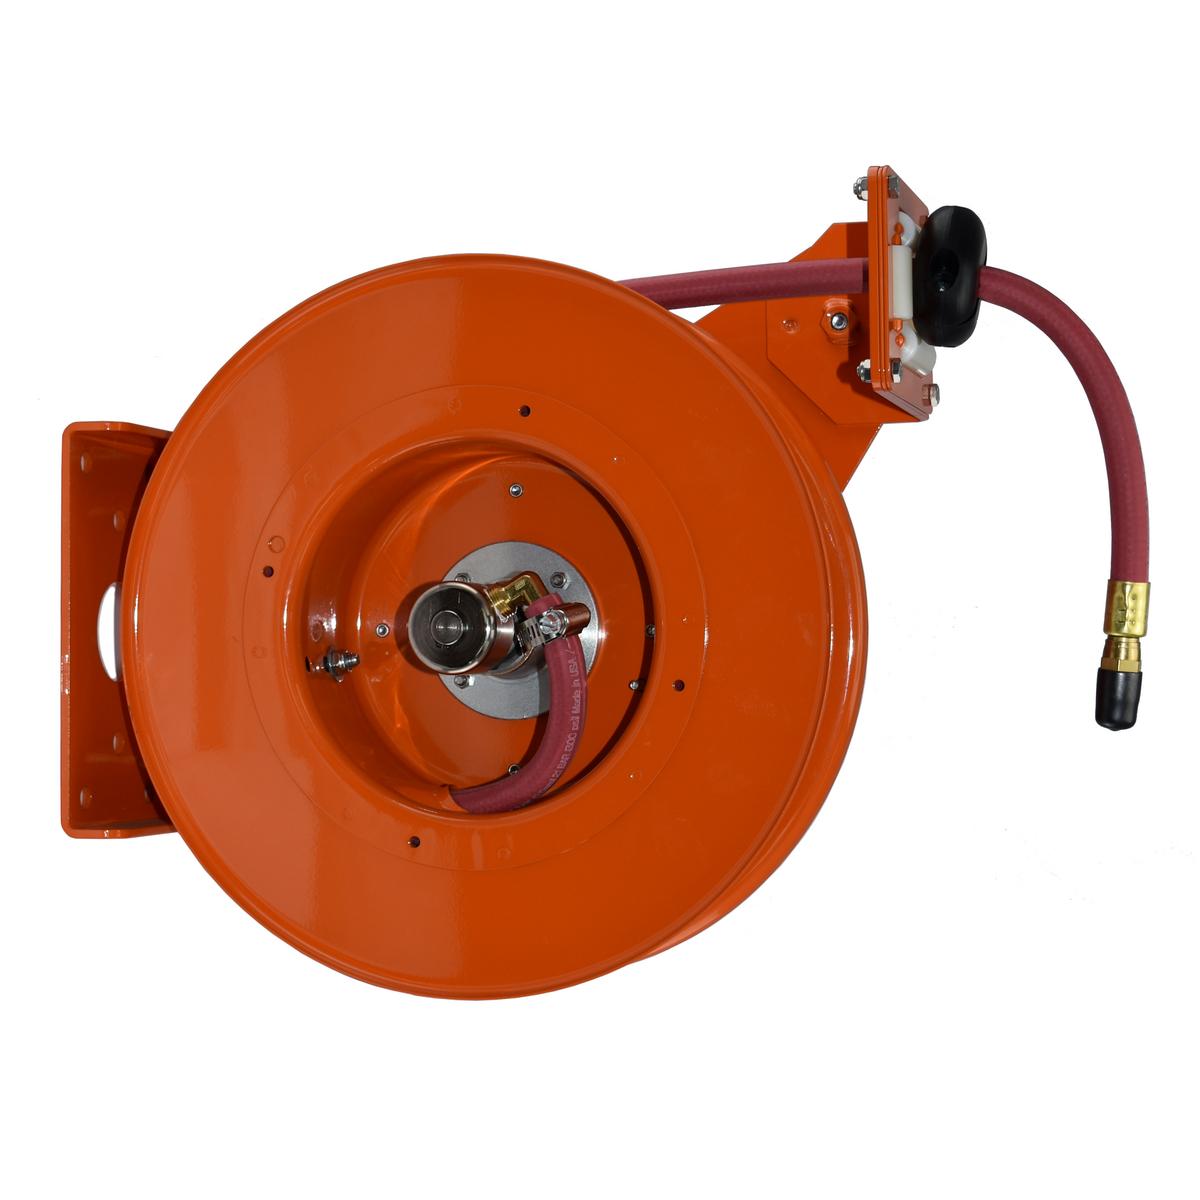 Hubbell HM141-4-P3 The Gleason Hose-Master hose reel is the most rugged single hose, general purpose hose reel of its size in the industry. We created it with the most demanding hose reeling applications in mind, hand pull or machine mounted. Oversized bearings and a heavy 